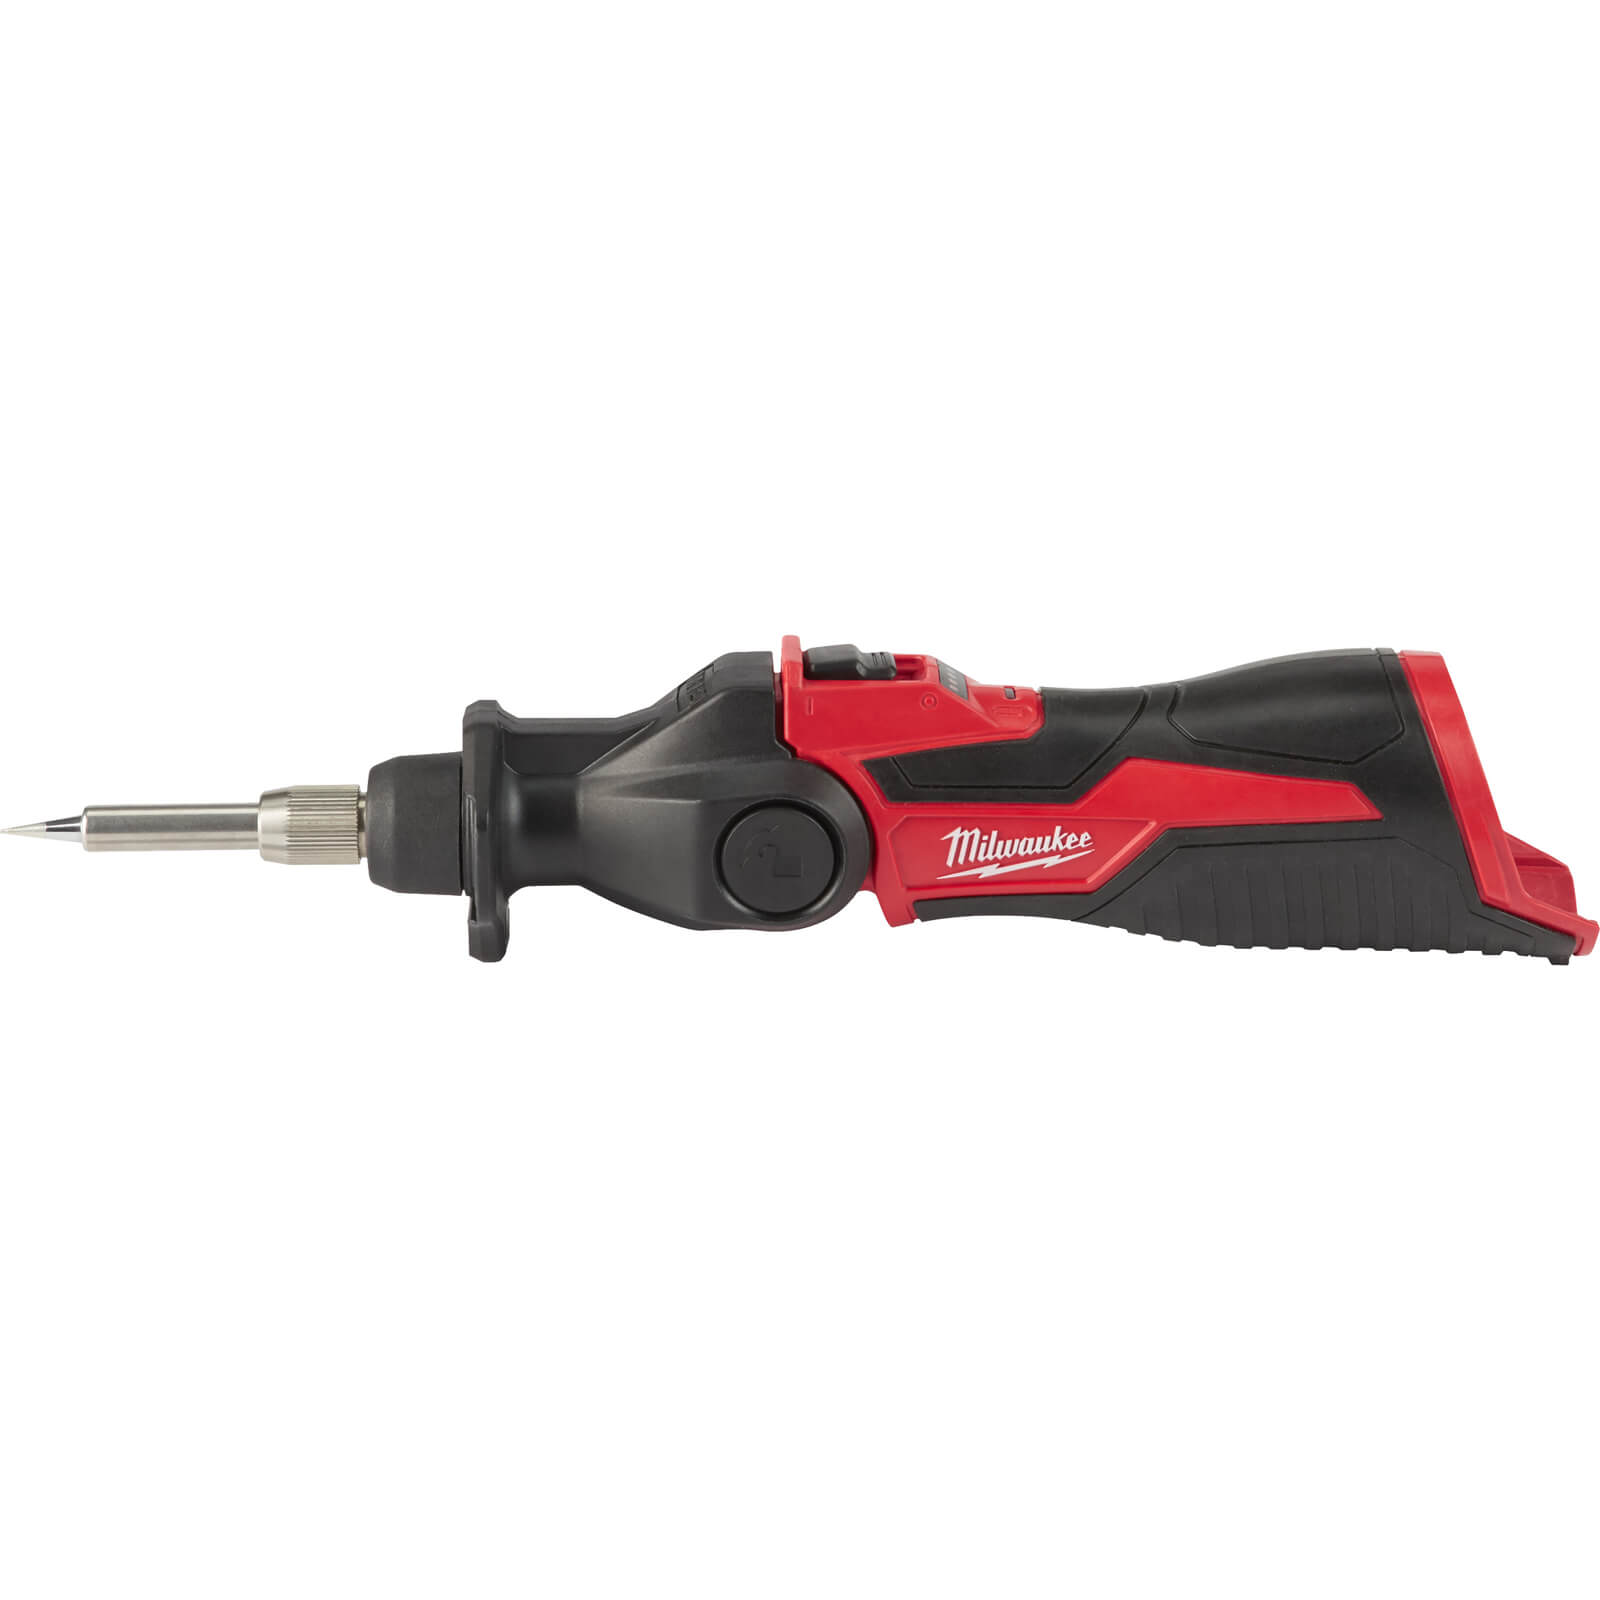 Image of Milwaukee M12 SI 12v Cordless Soldering Iron No Batteries No Charger No Case